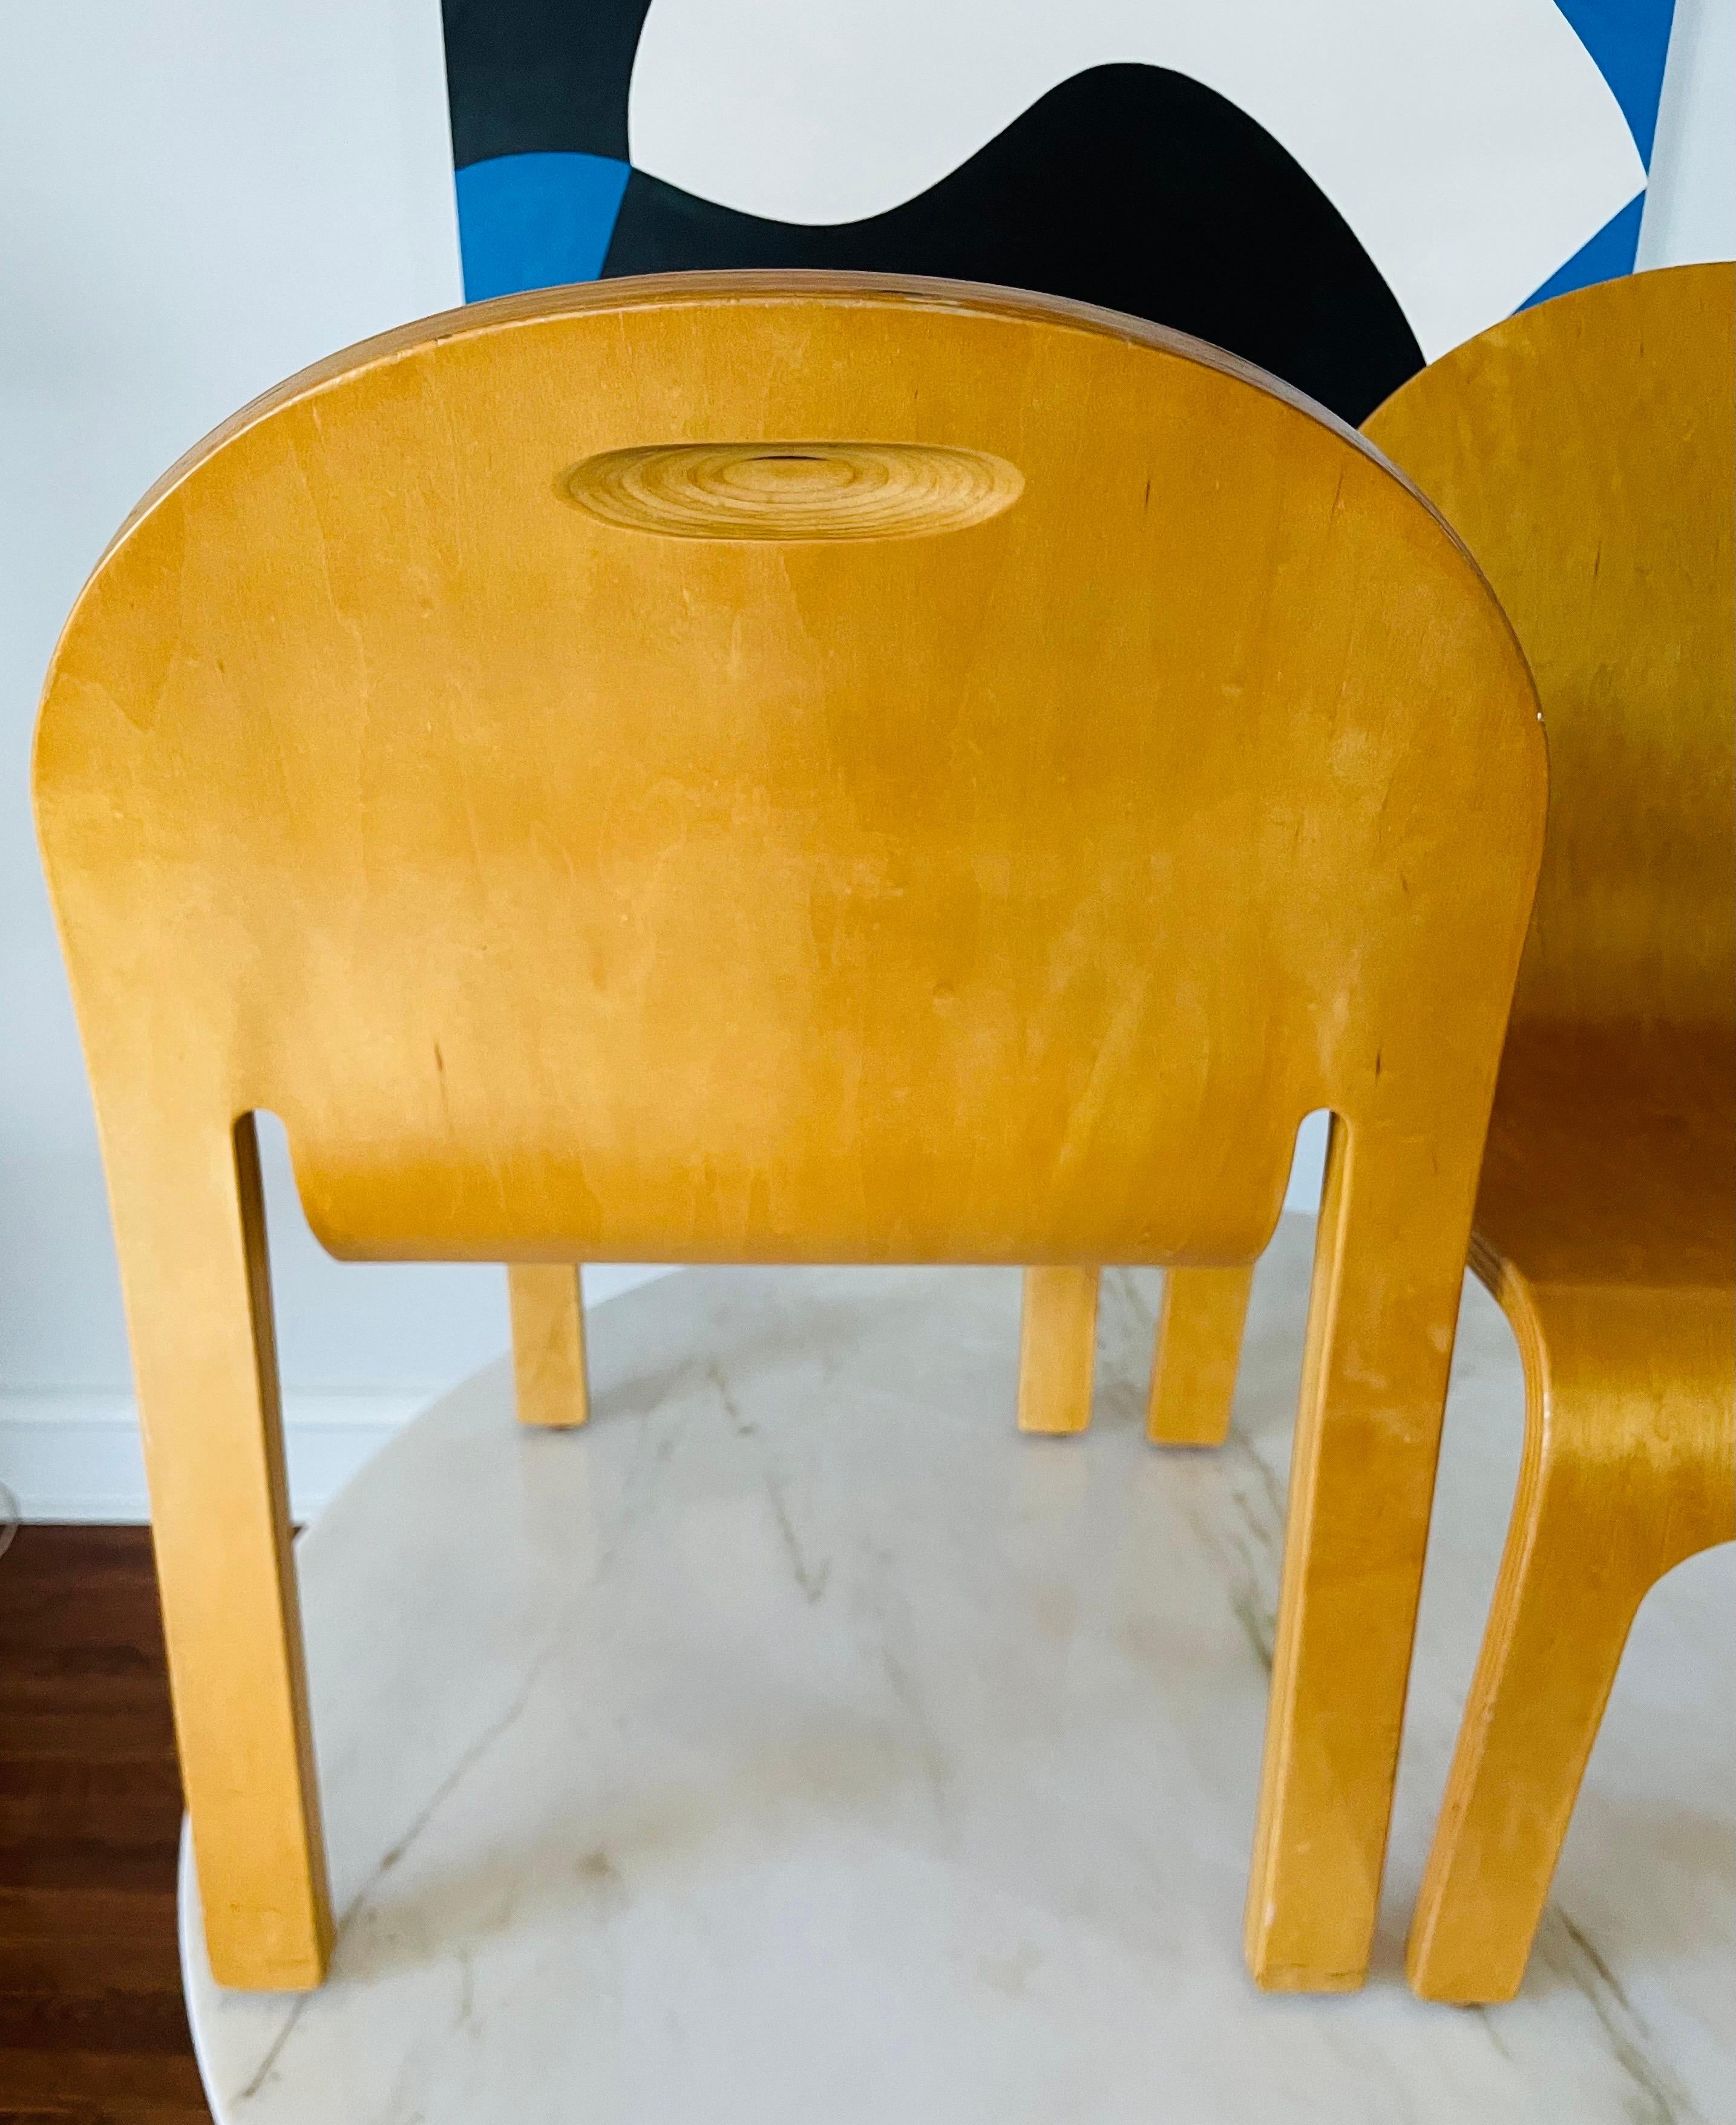 Children's Bodyform Chairs by Peter Danko, 1980s, American For Sale 2